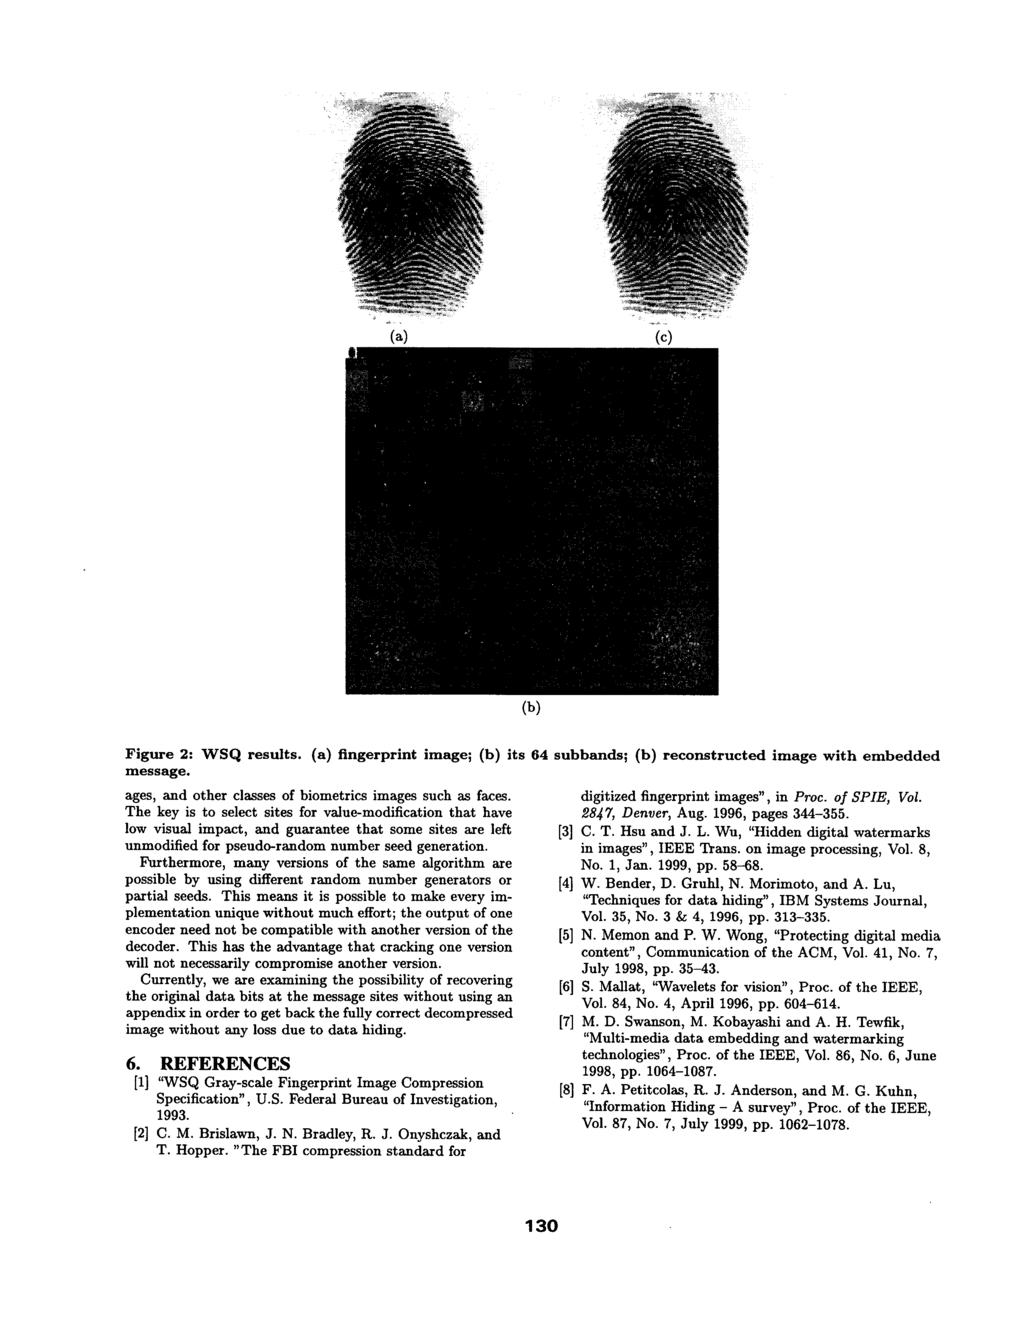 Results (a) (c) (a) The initial fingerprint image (b) The subbands of the wavelet transform (c) The reconstructed image ages, and other classes of biometrics images